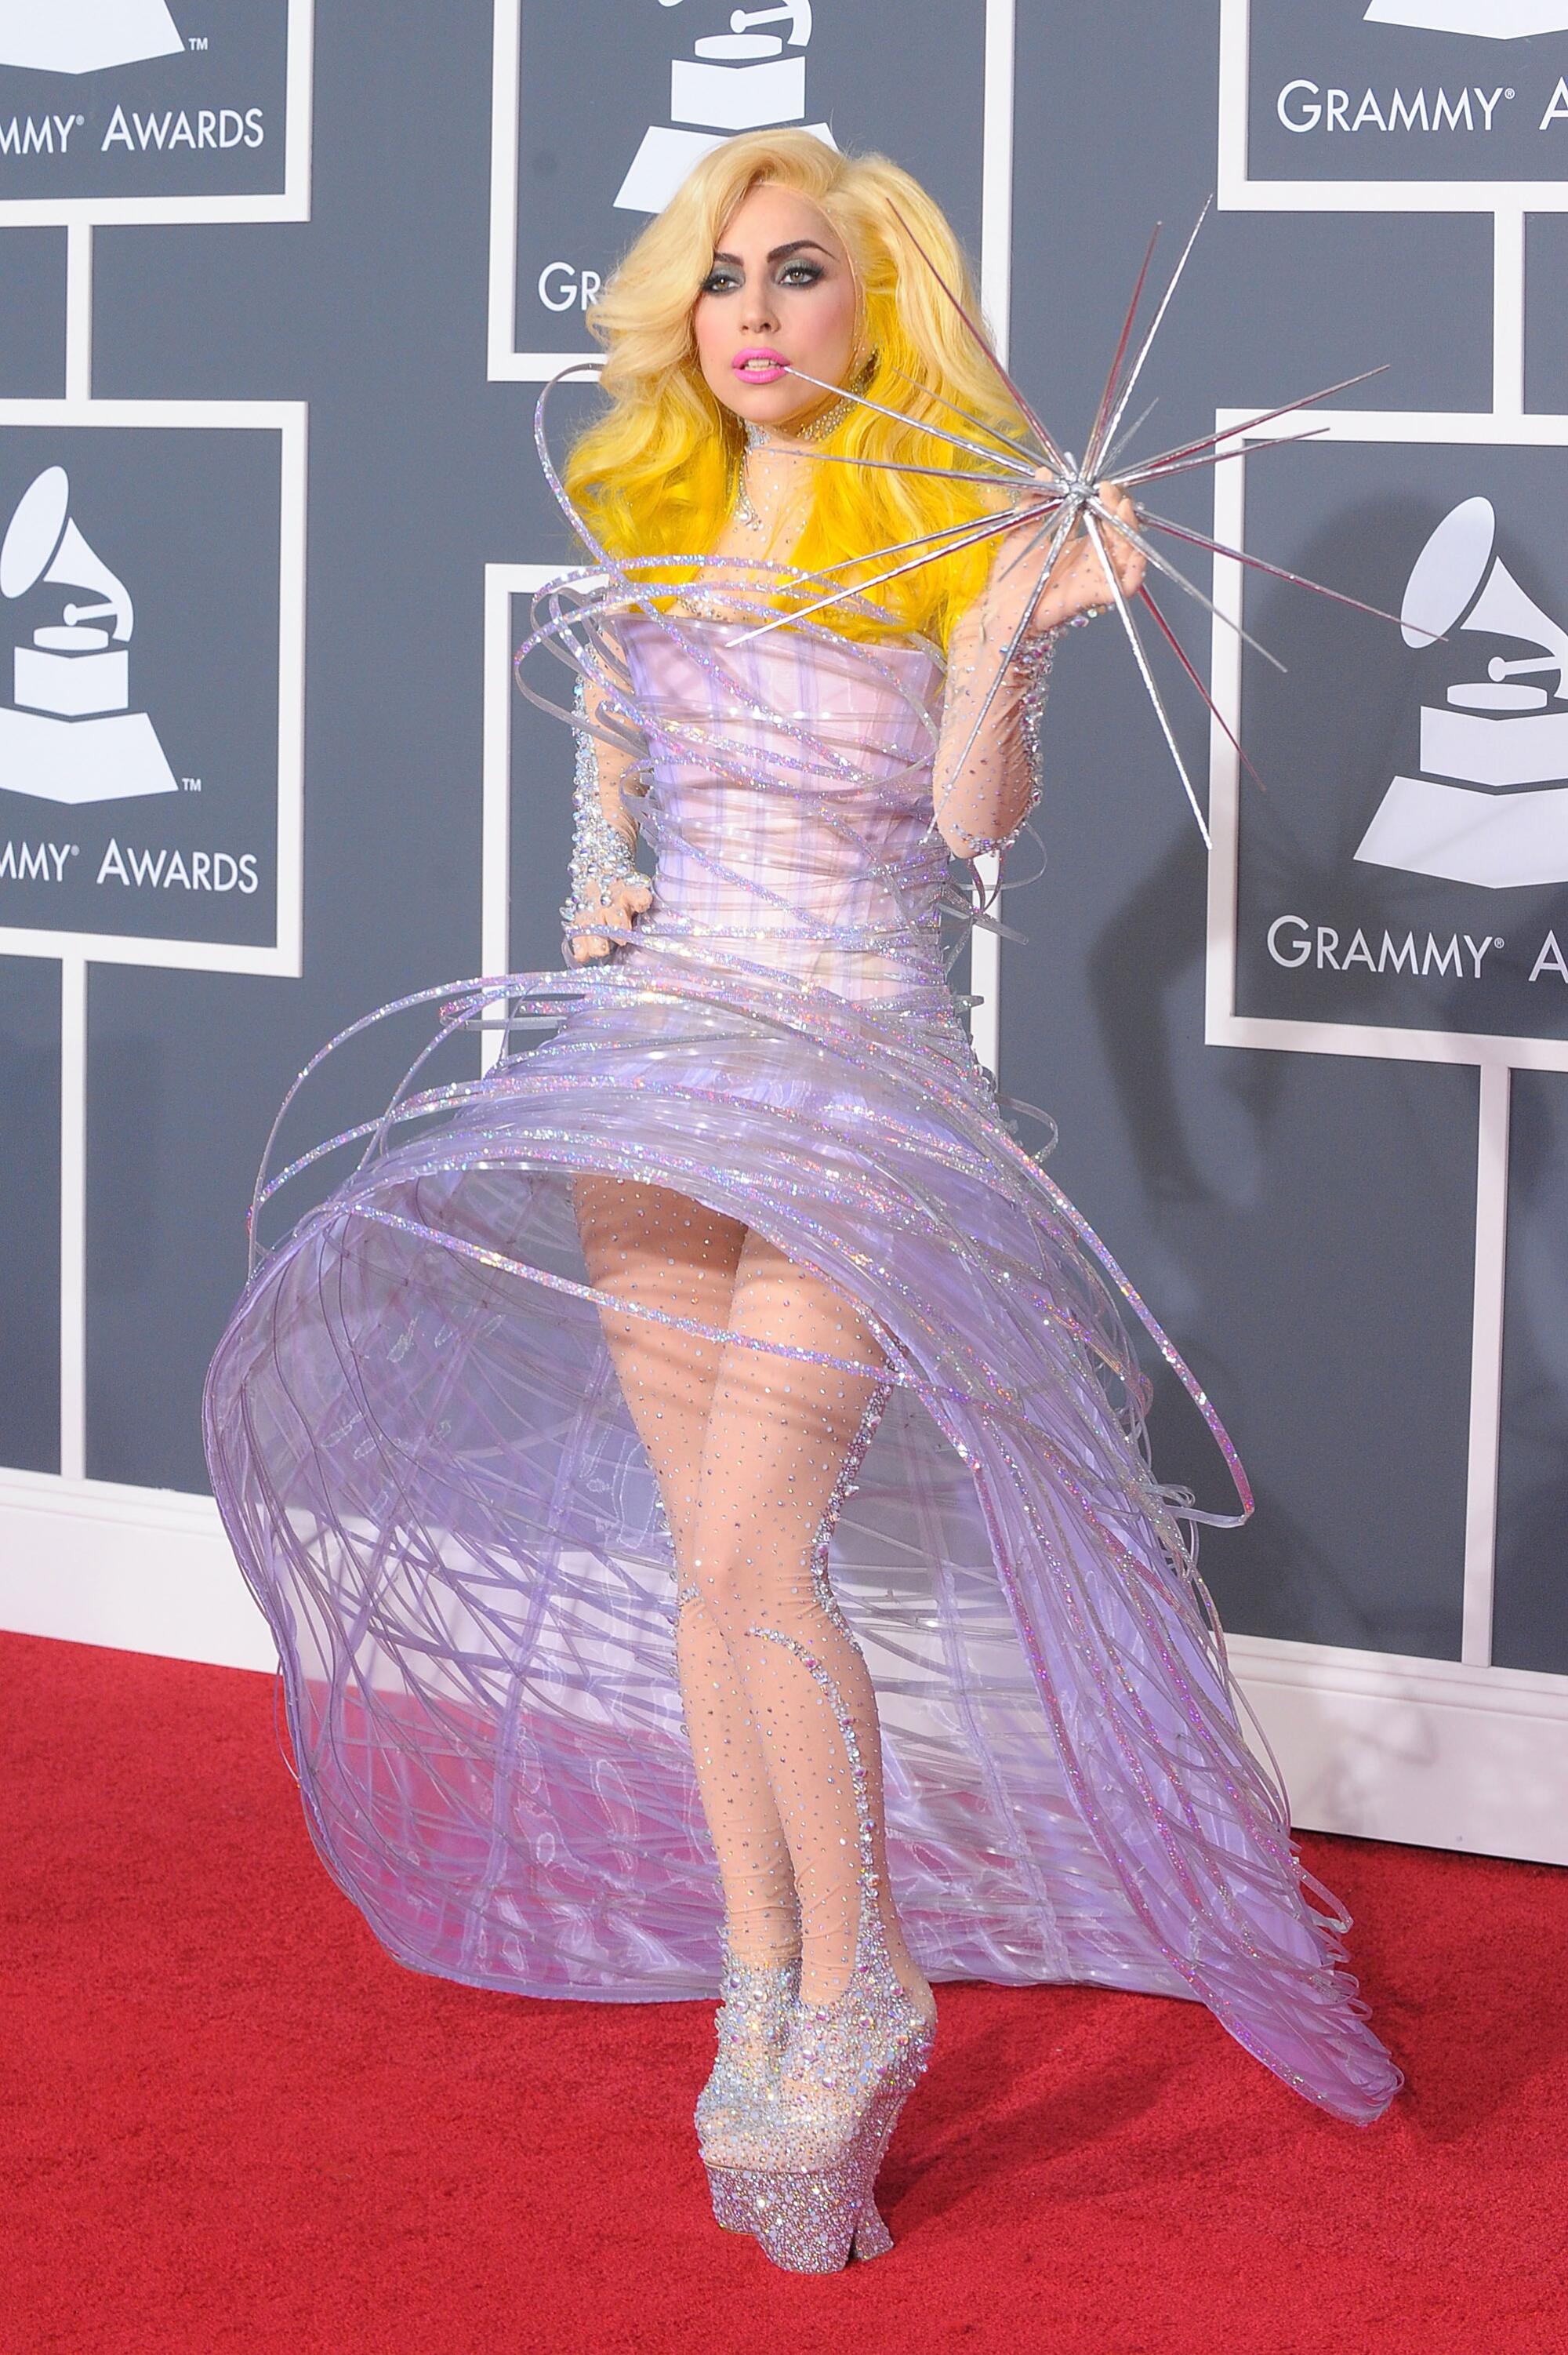 Musician Lady Gaga arrives at the 52nd Annual GRAMMY Awards